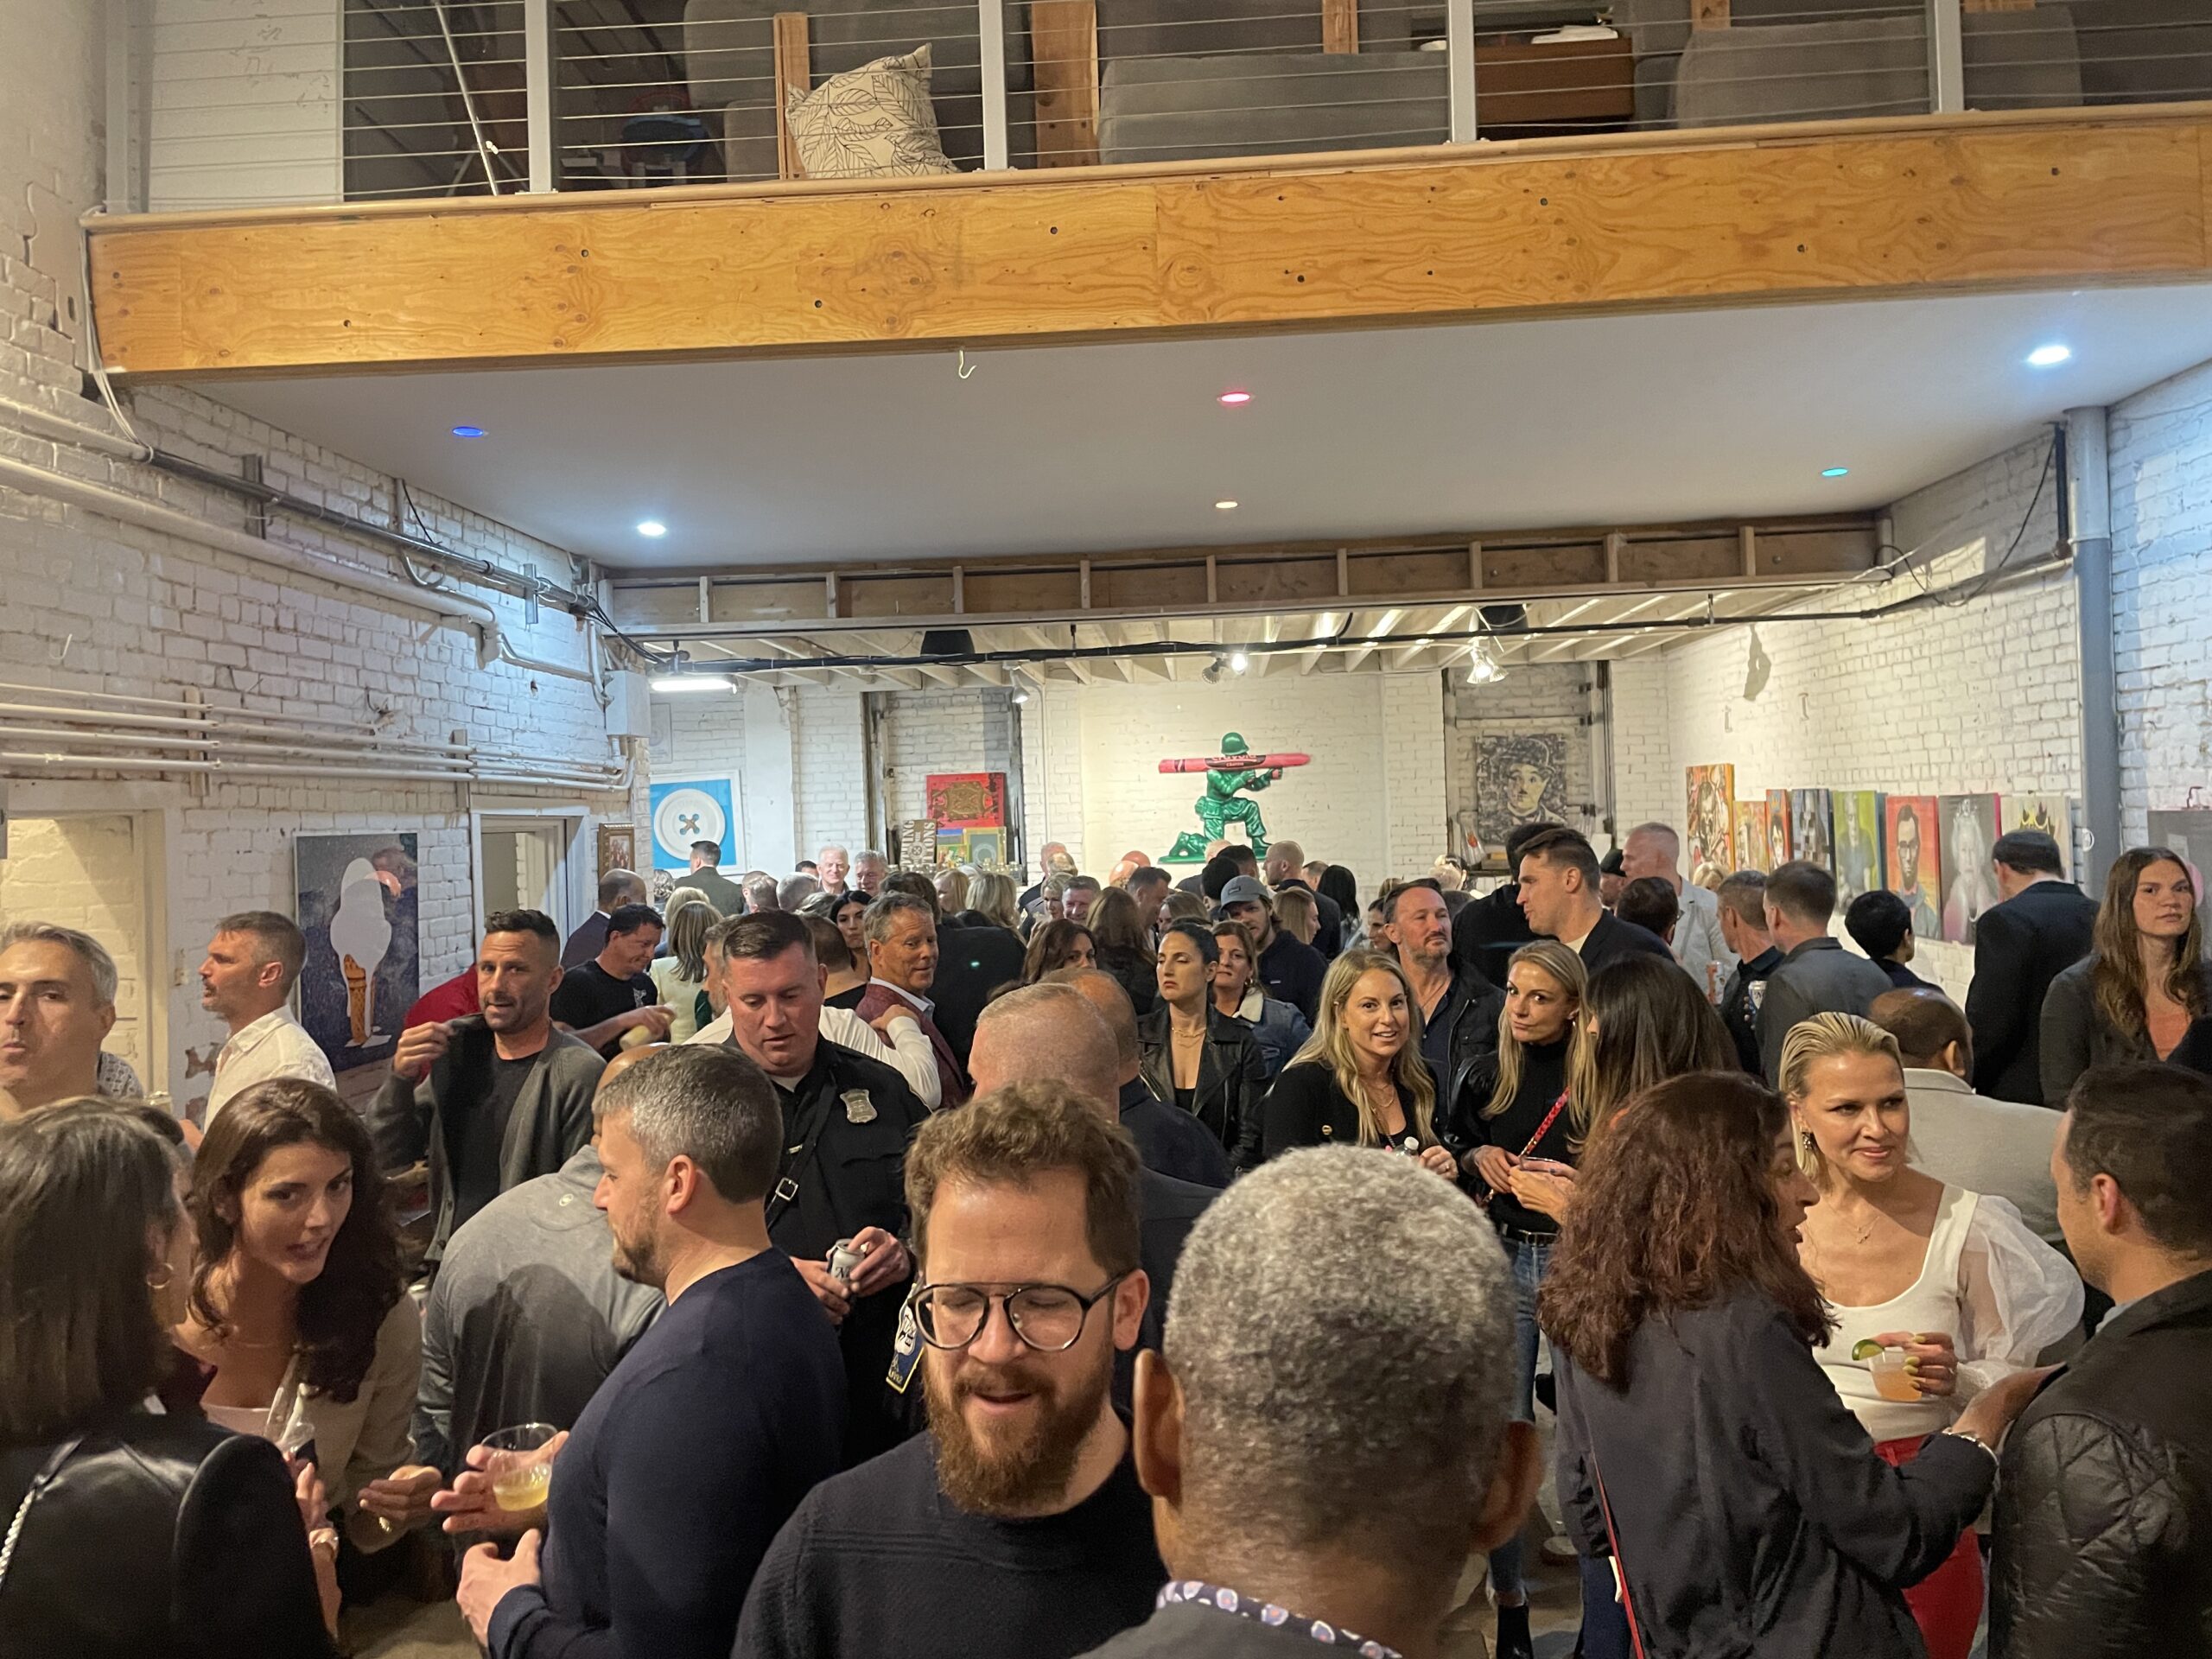 Over 200 guests attended "Just Cause" at the Boston Button Factory